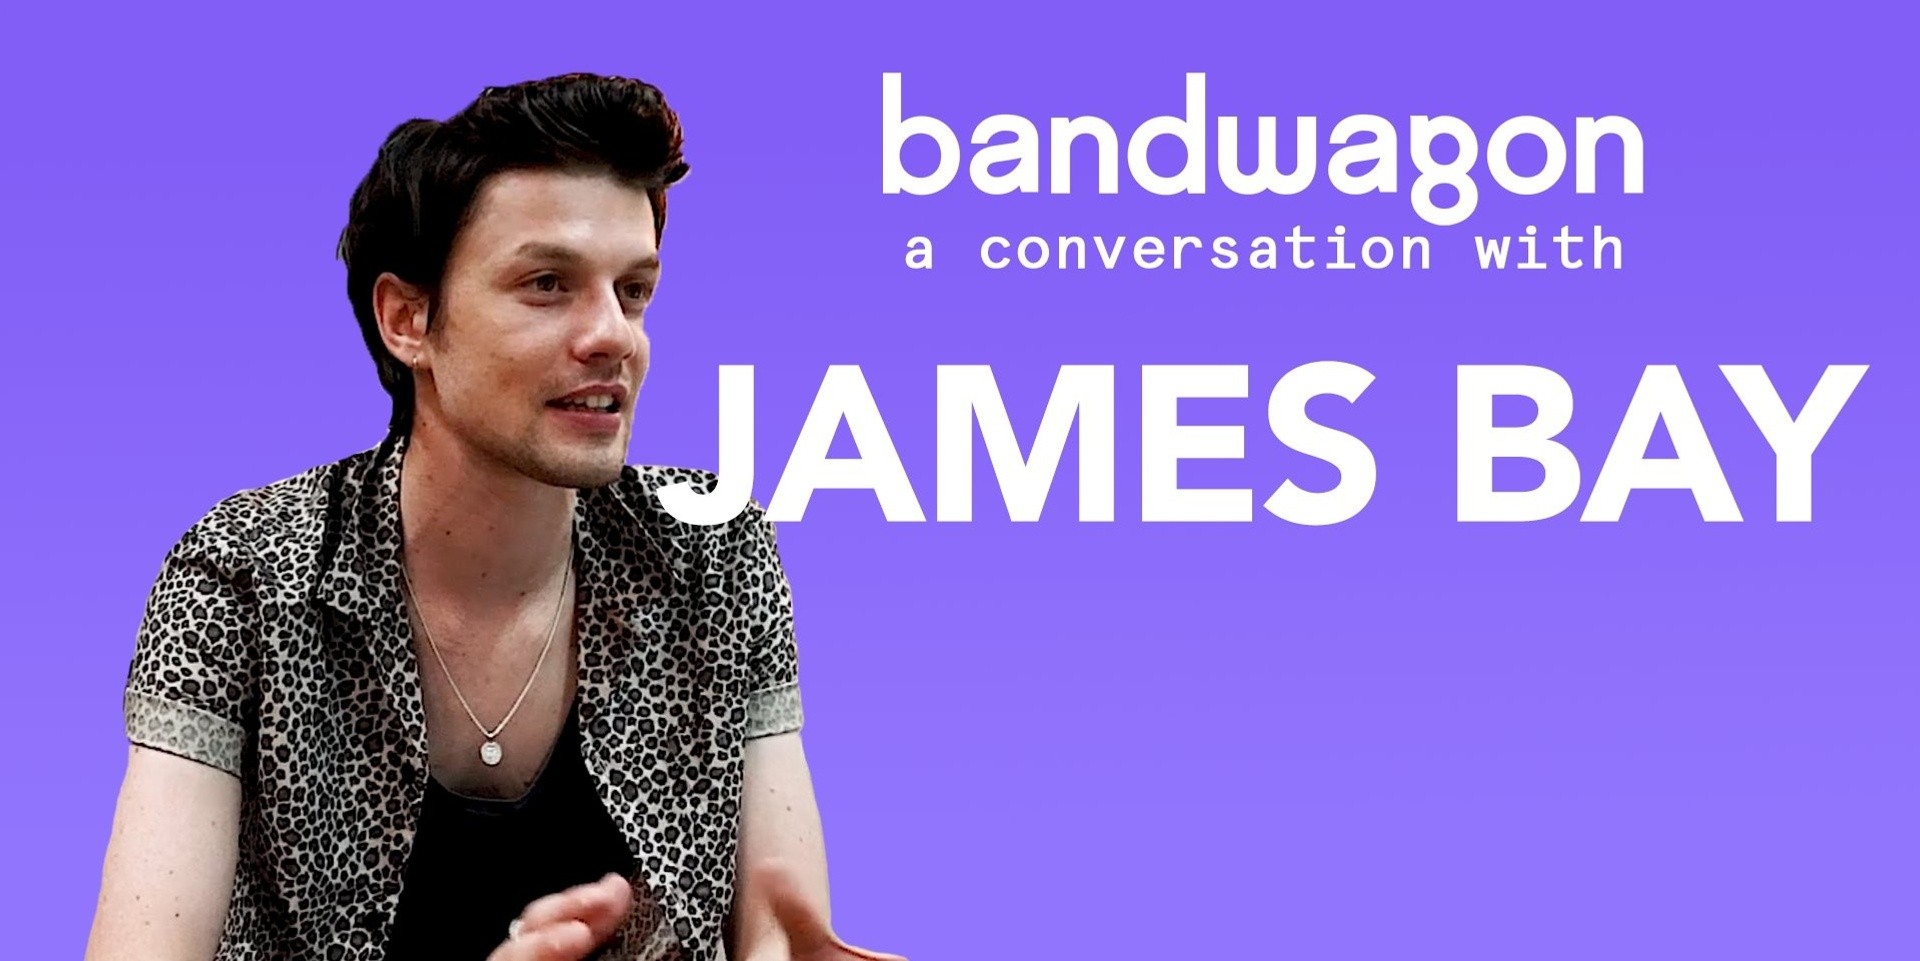 James Bay talks about his latest album, his inspirations and more – watch 